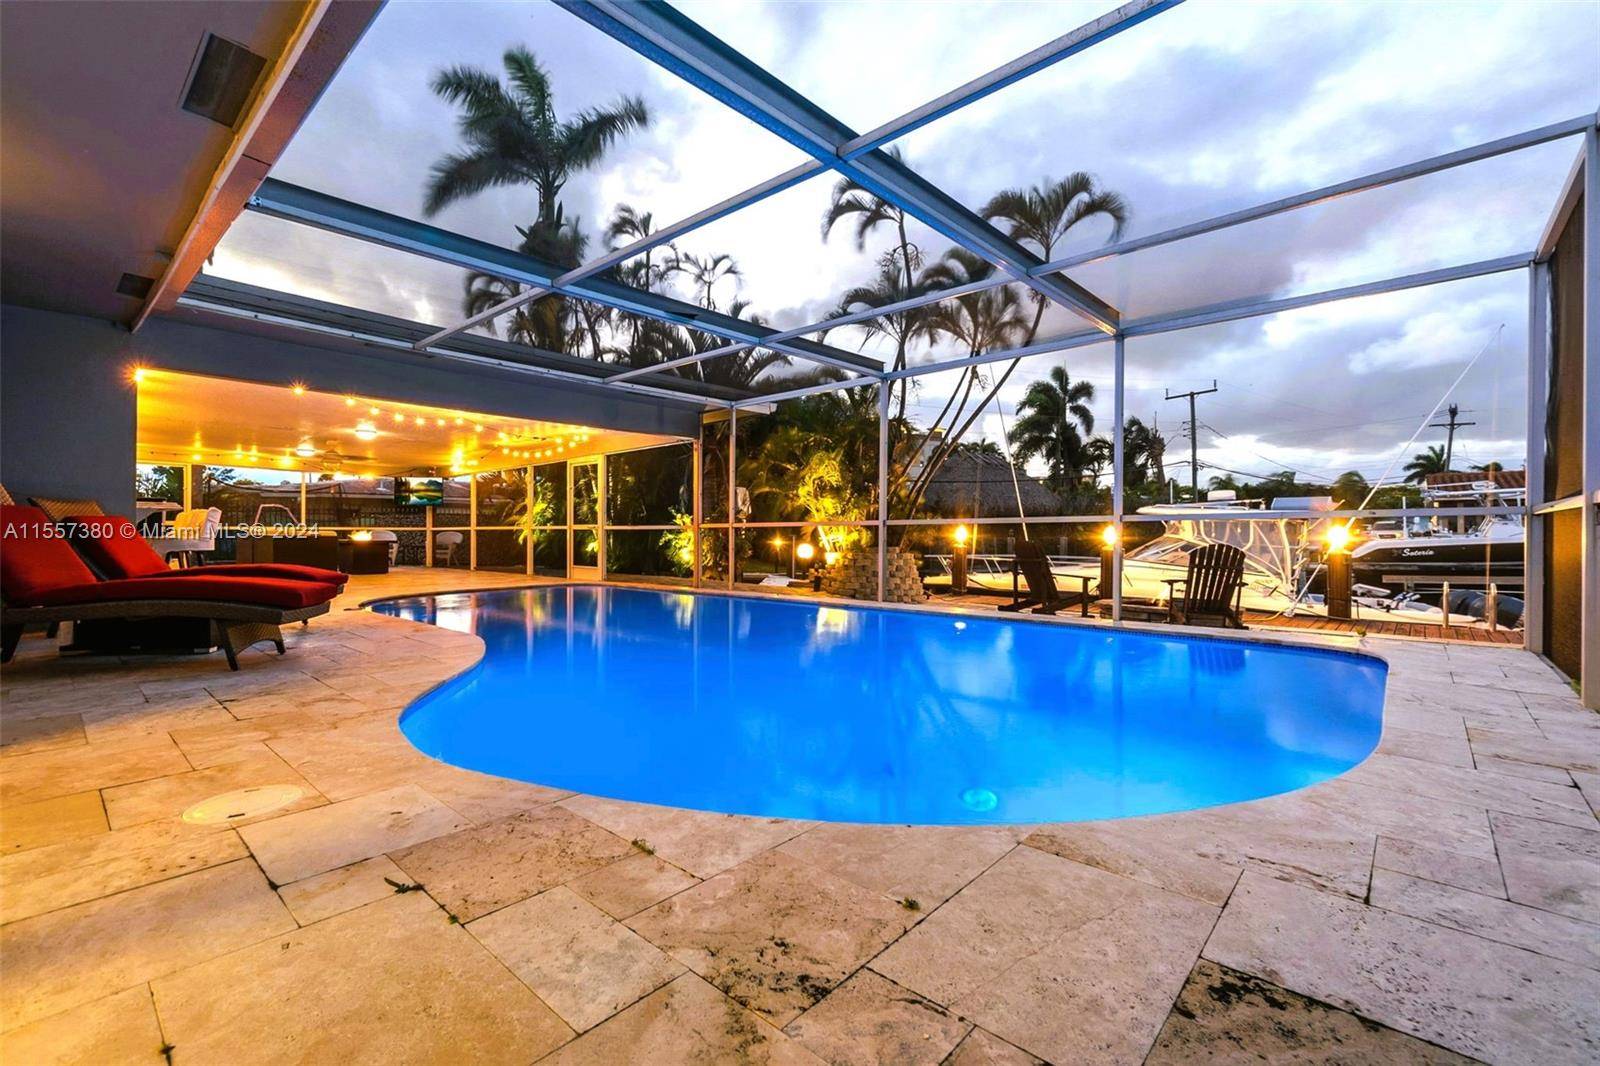 South Florida living at its finest with this stunning 3 bed 3 bath pool homel with 75' dock and direct ocean access no fixed bridges.